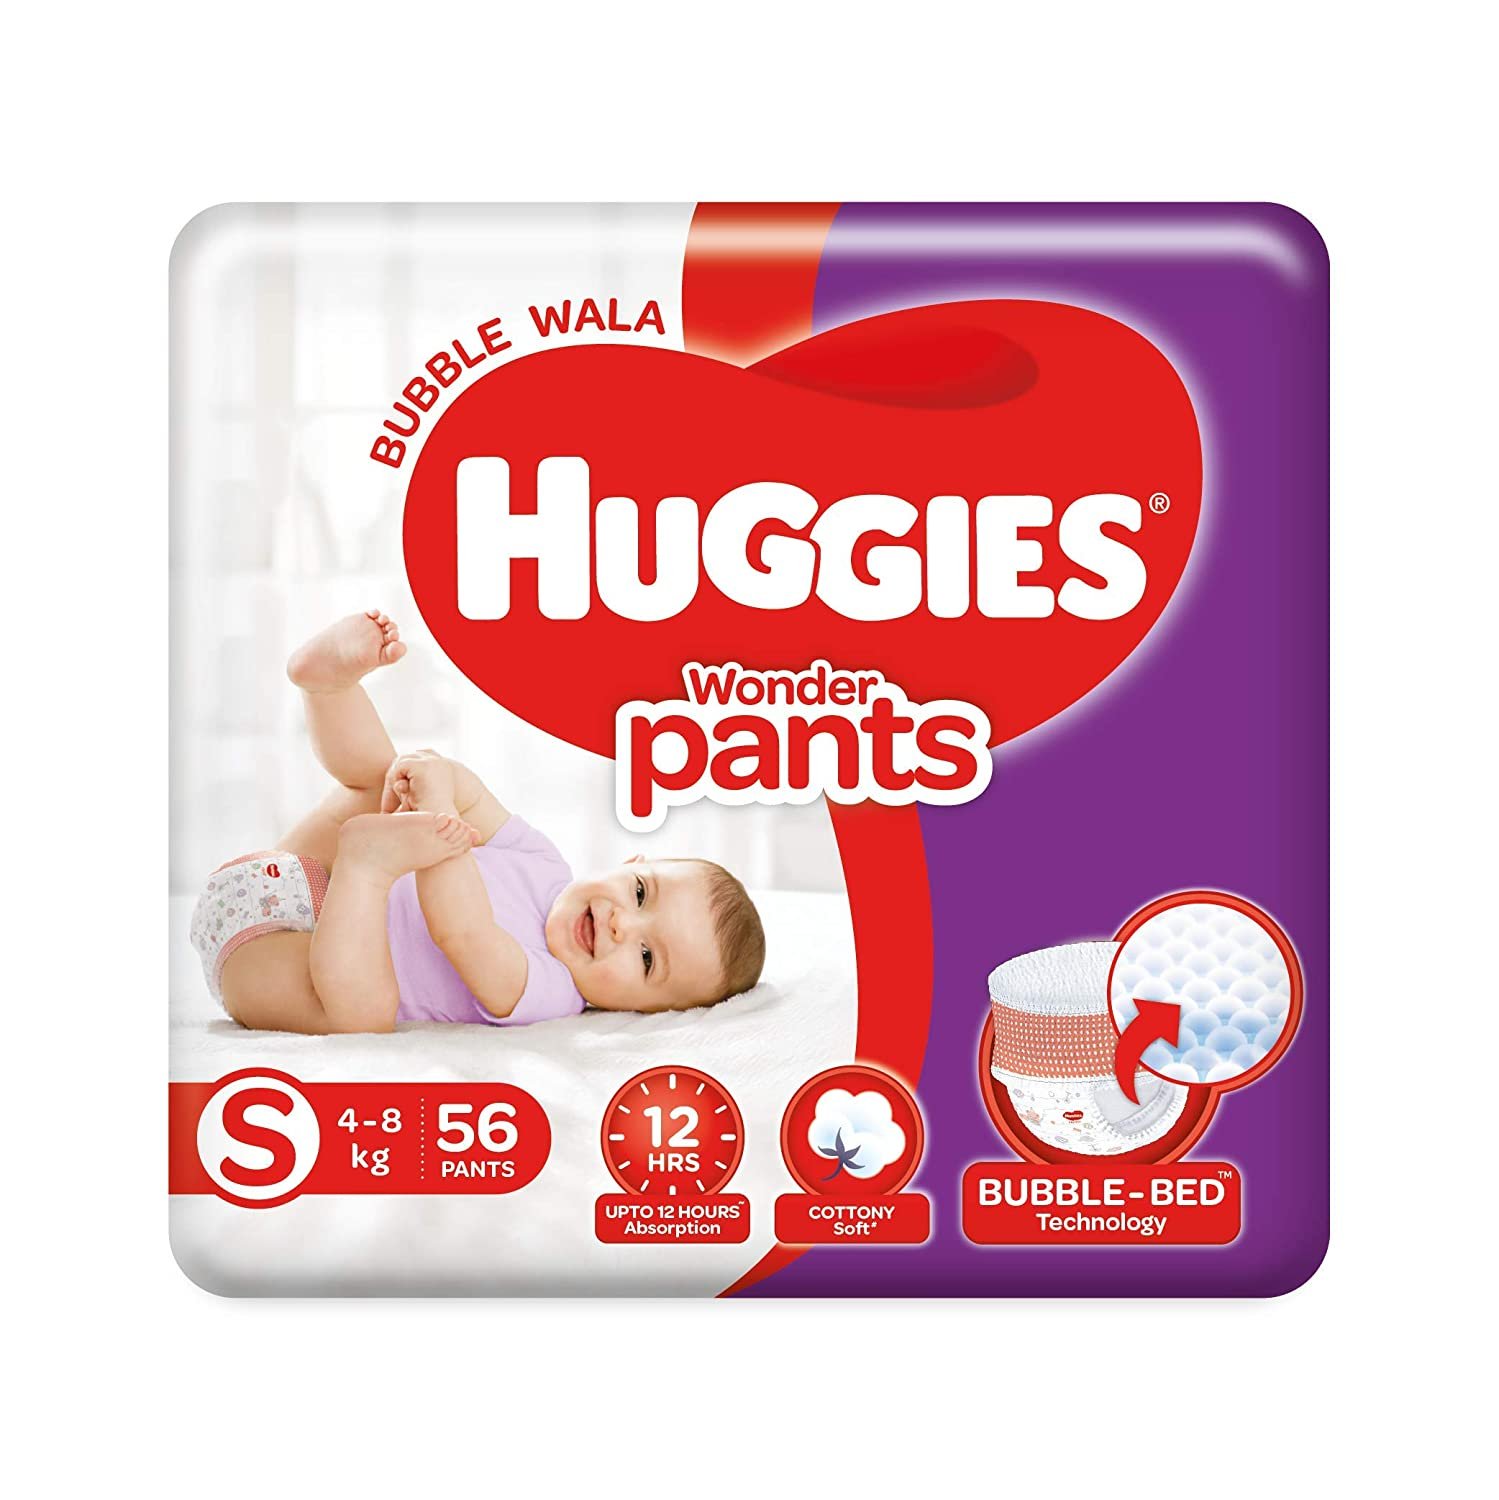 Buy Huggies Dry Pants, Small Size Diapers, 36 count & Huggies Wonder Pants,  Large Size Diapers, 32 Count Online at Low Prices in India - Amazon.in